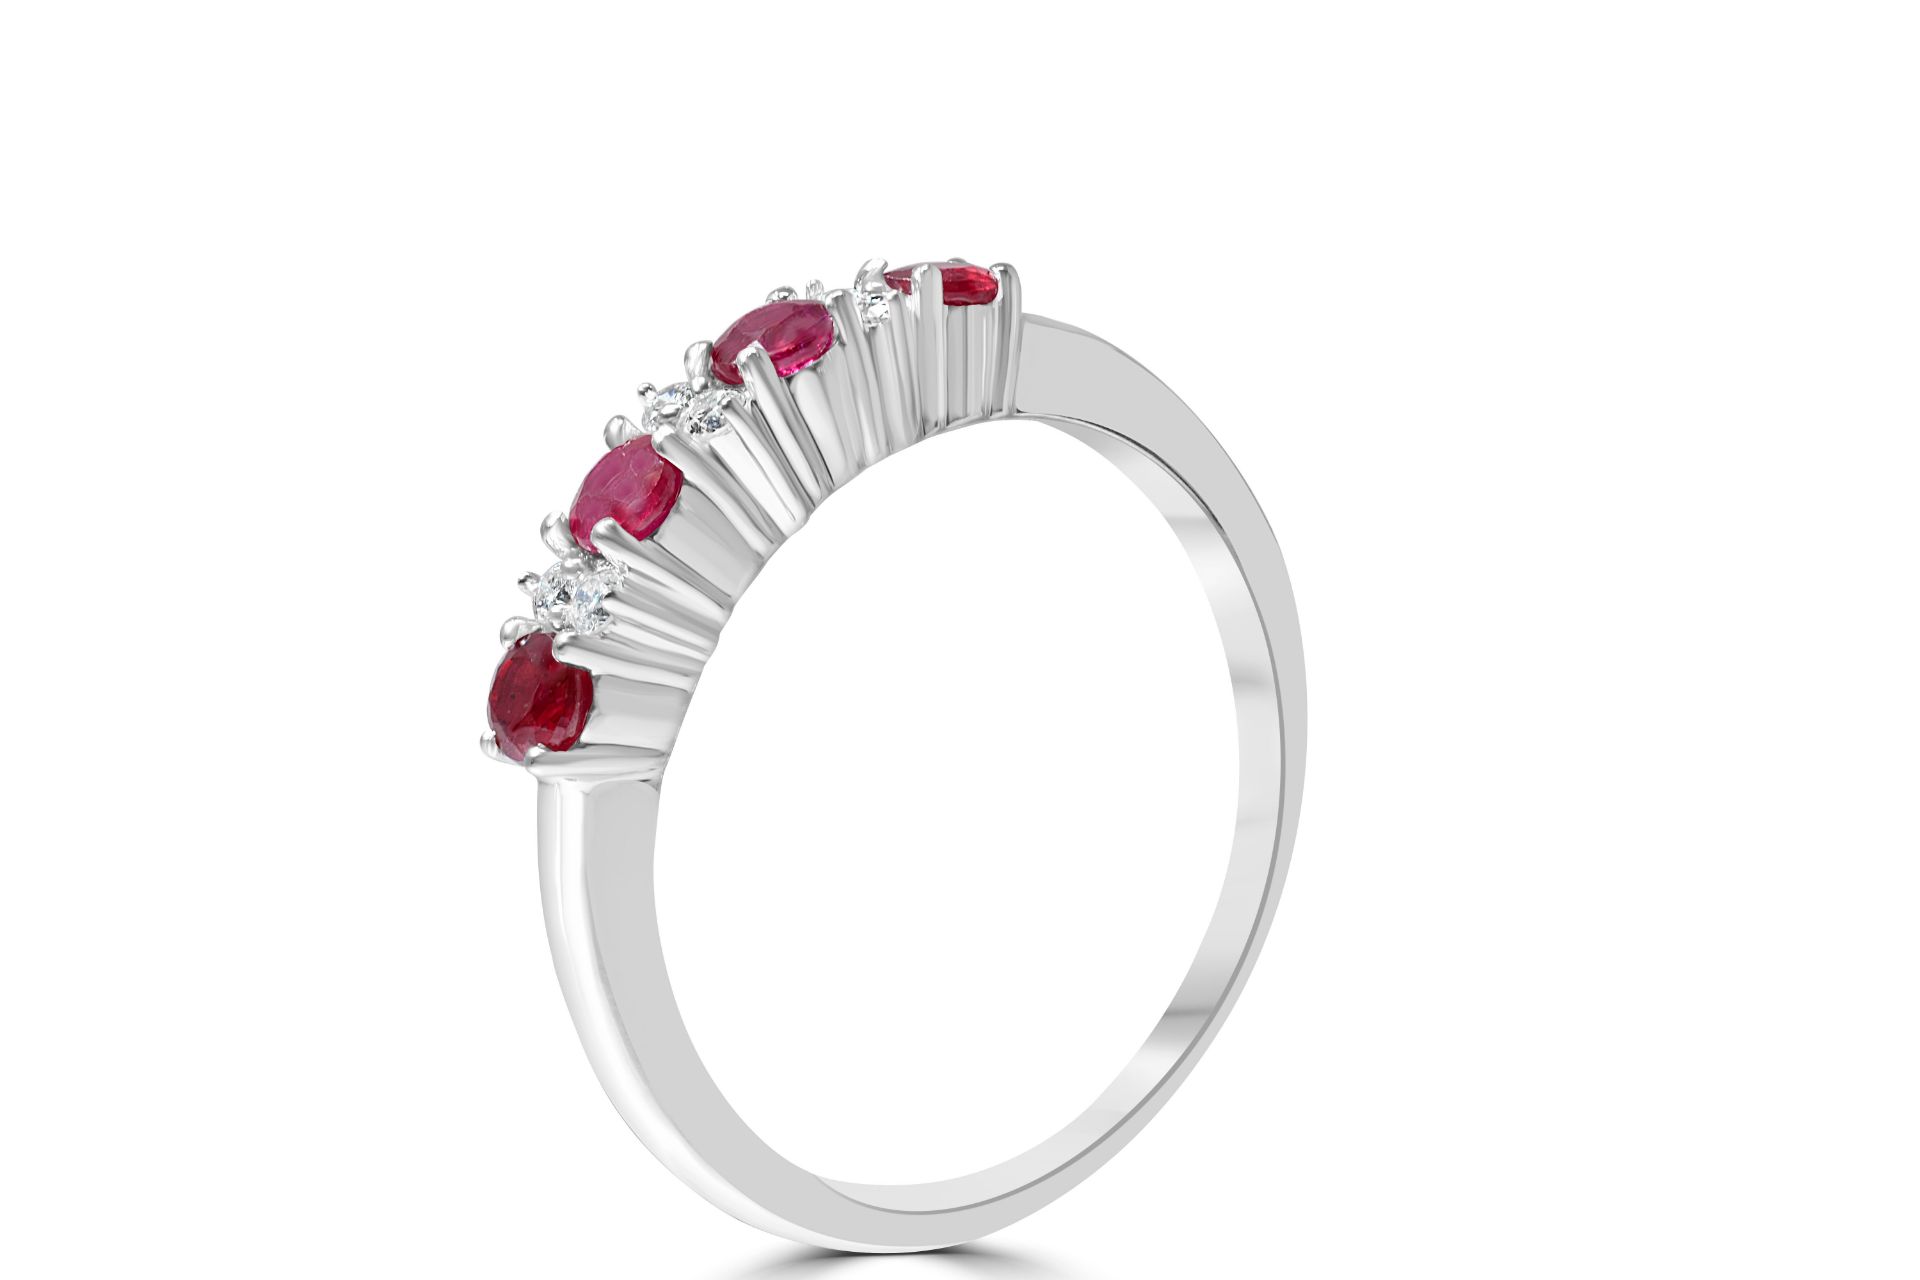 Ruby and Diamond White Gold Eternity Ring, Metal 9ct White Gold, Diamond Weight (ct) 0.08, Colour H, - Image 2 of 4